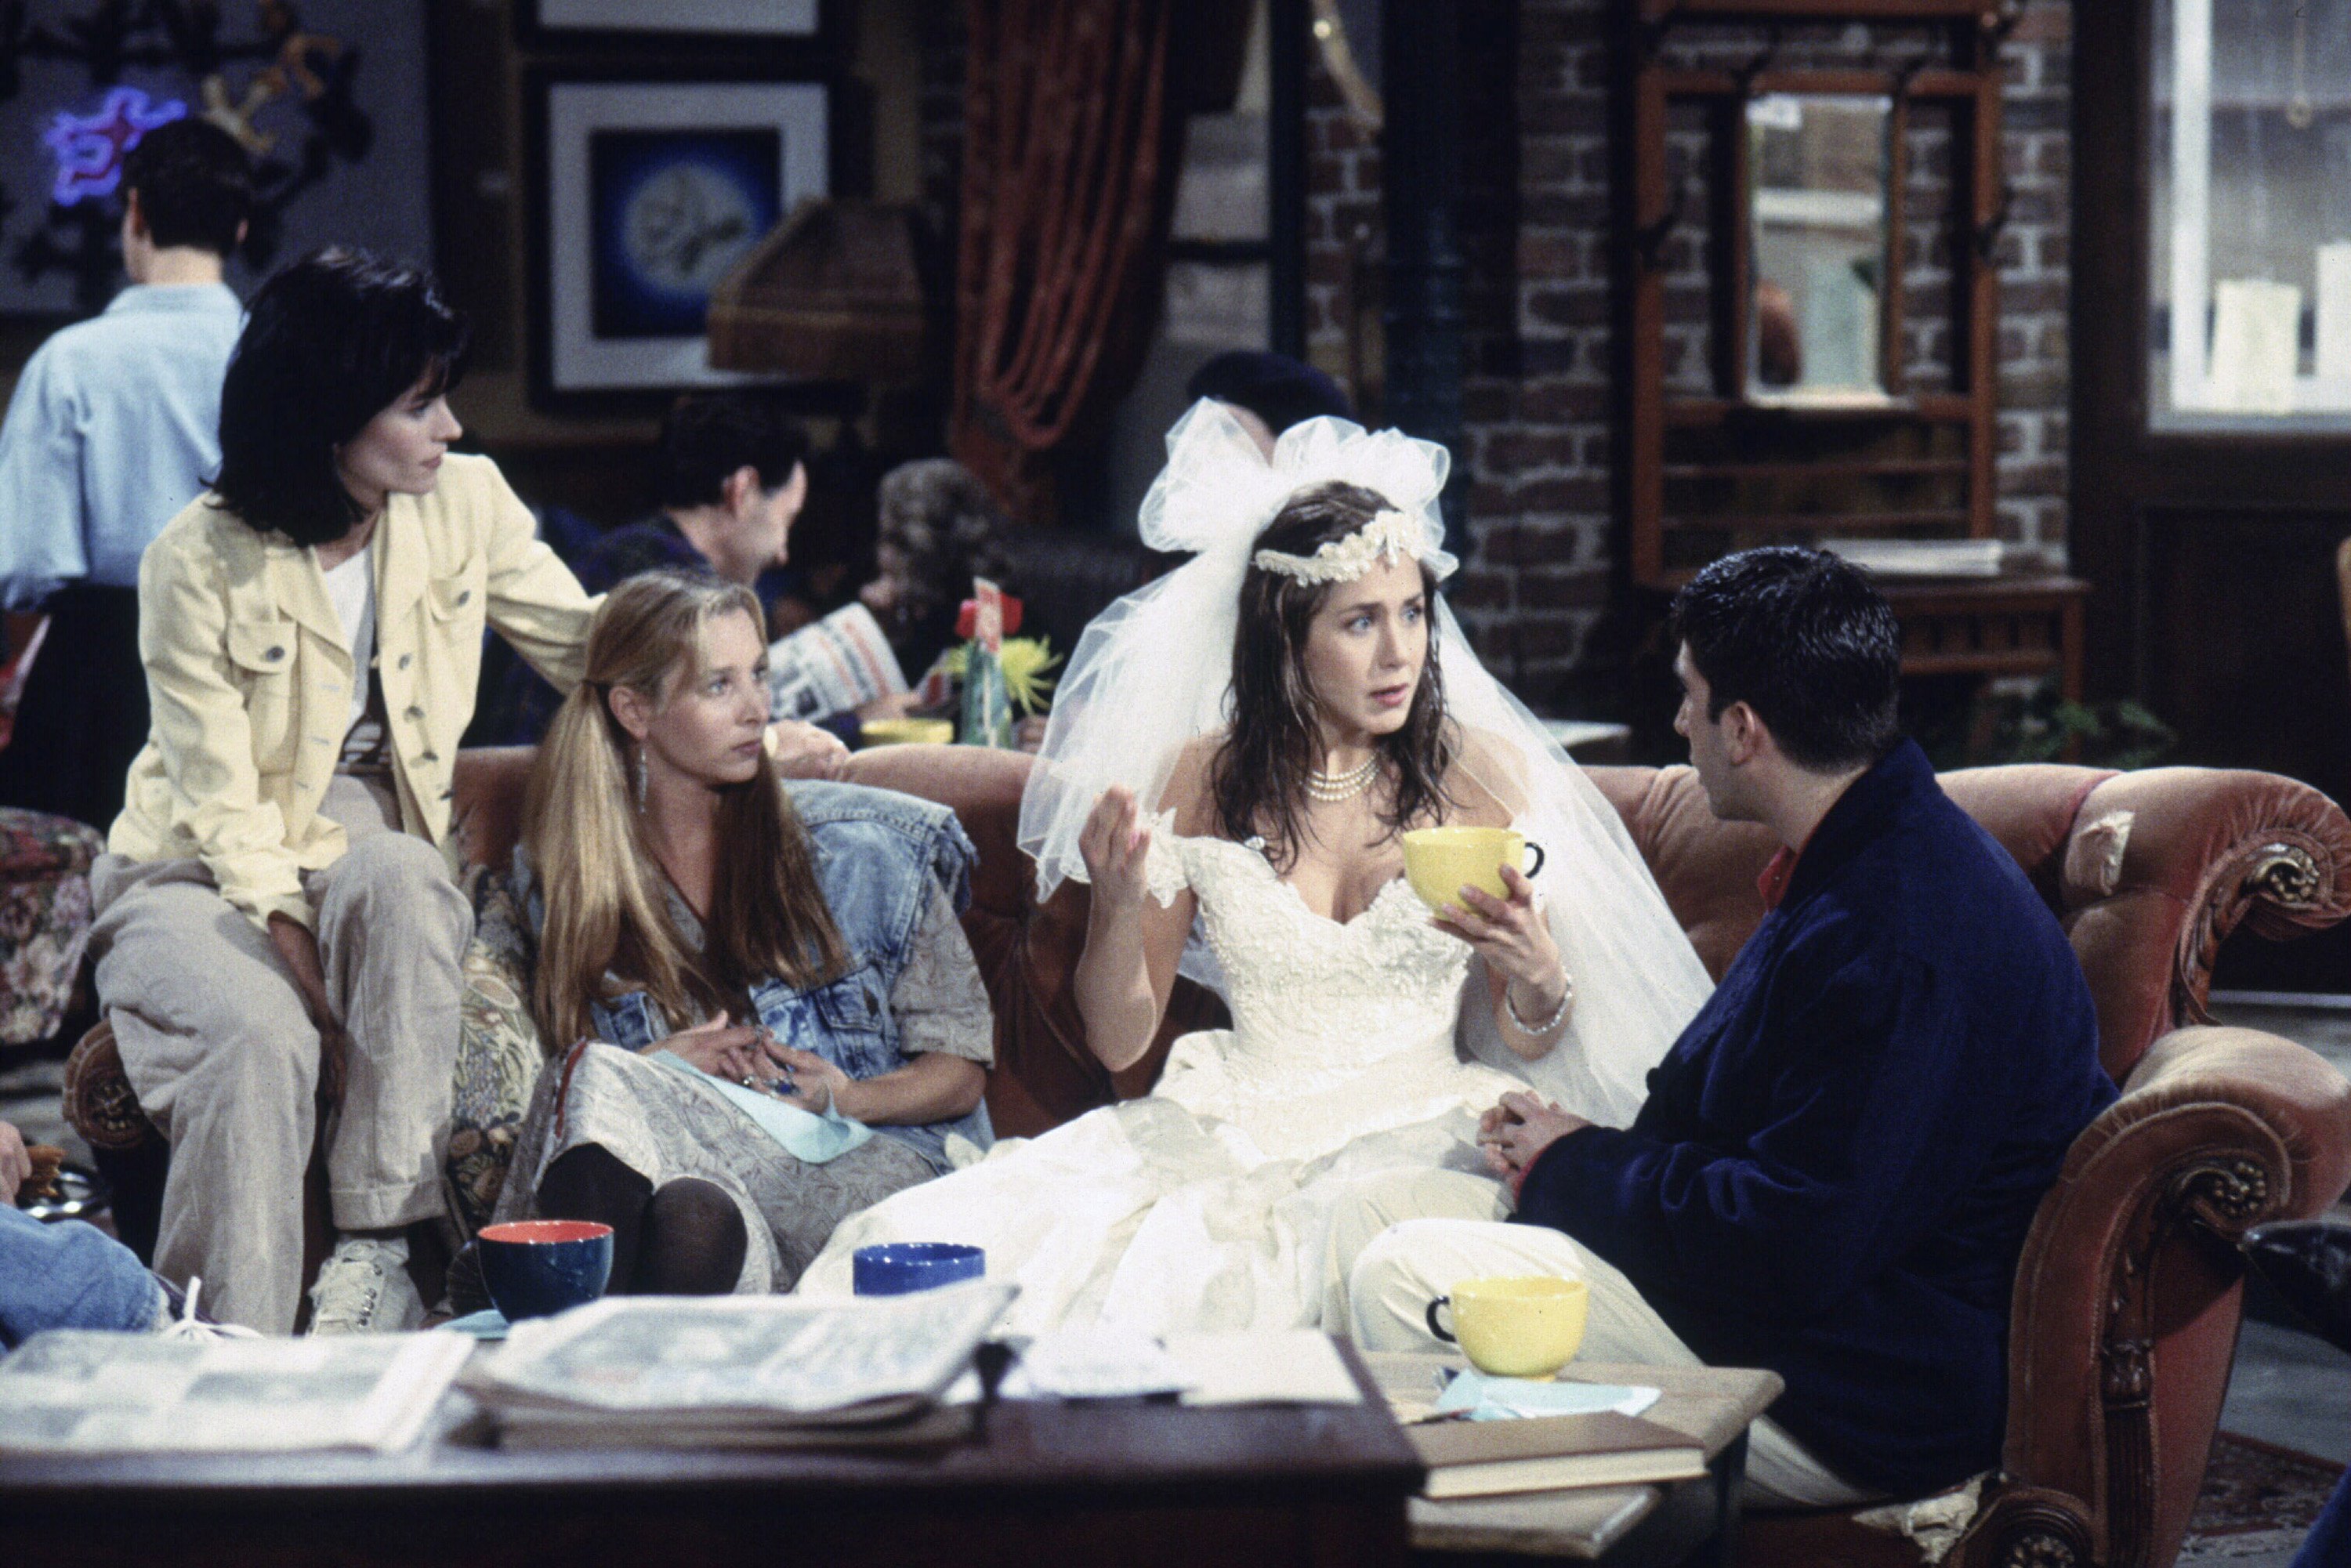 A scene from the pilot episode of friends, featuring Ross and Rachel, Monica and Phoebe